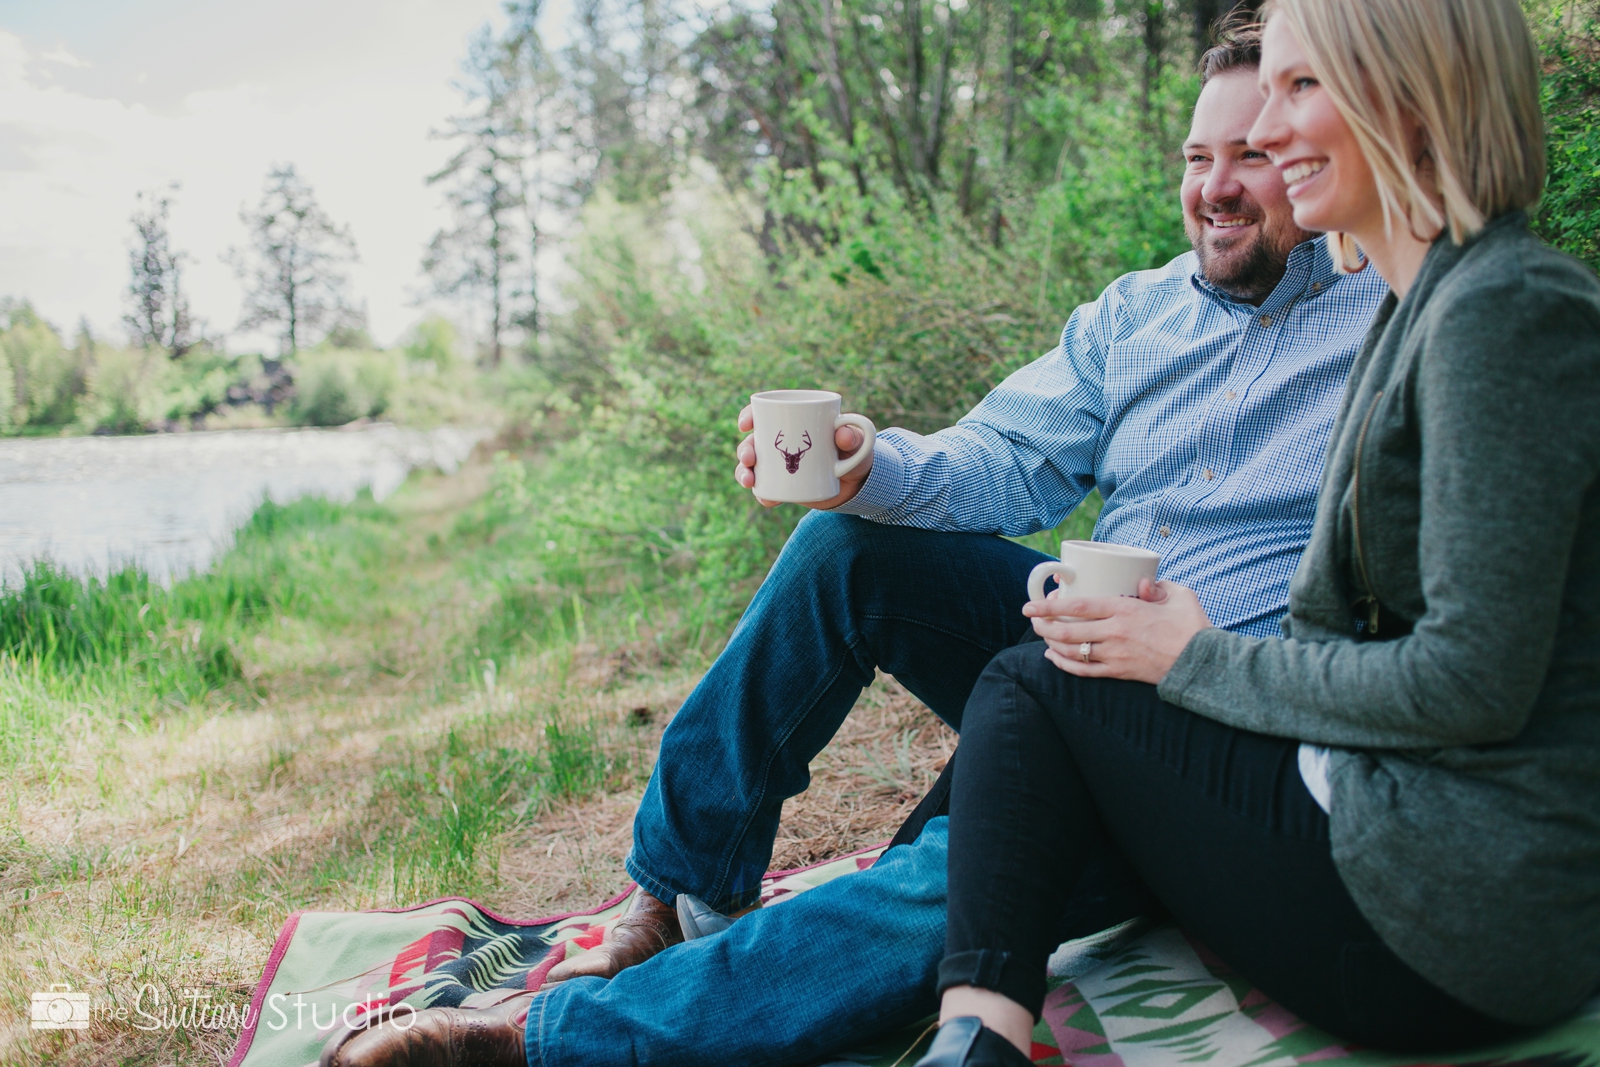 Bend, Oregon Lifestyle Wedding Photographer -  The Suitcase Studio - Engagement Photos at Big Eddy - Picnic with coffee